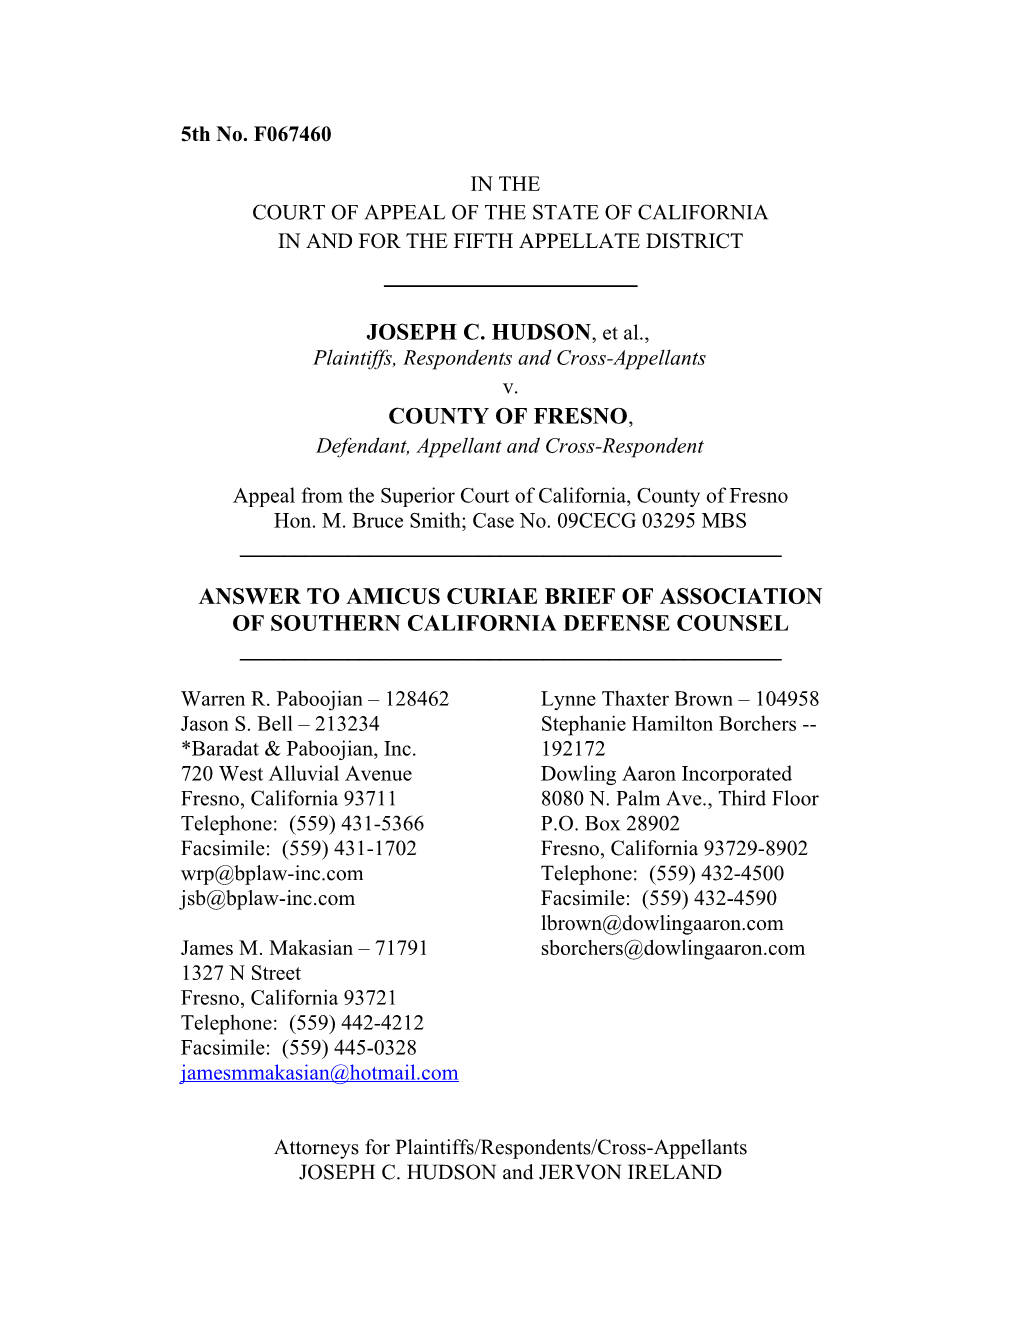 Court of Appeal of the State of California s1